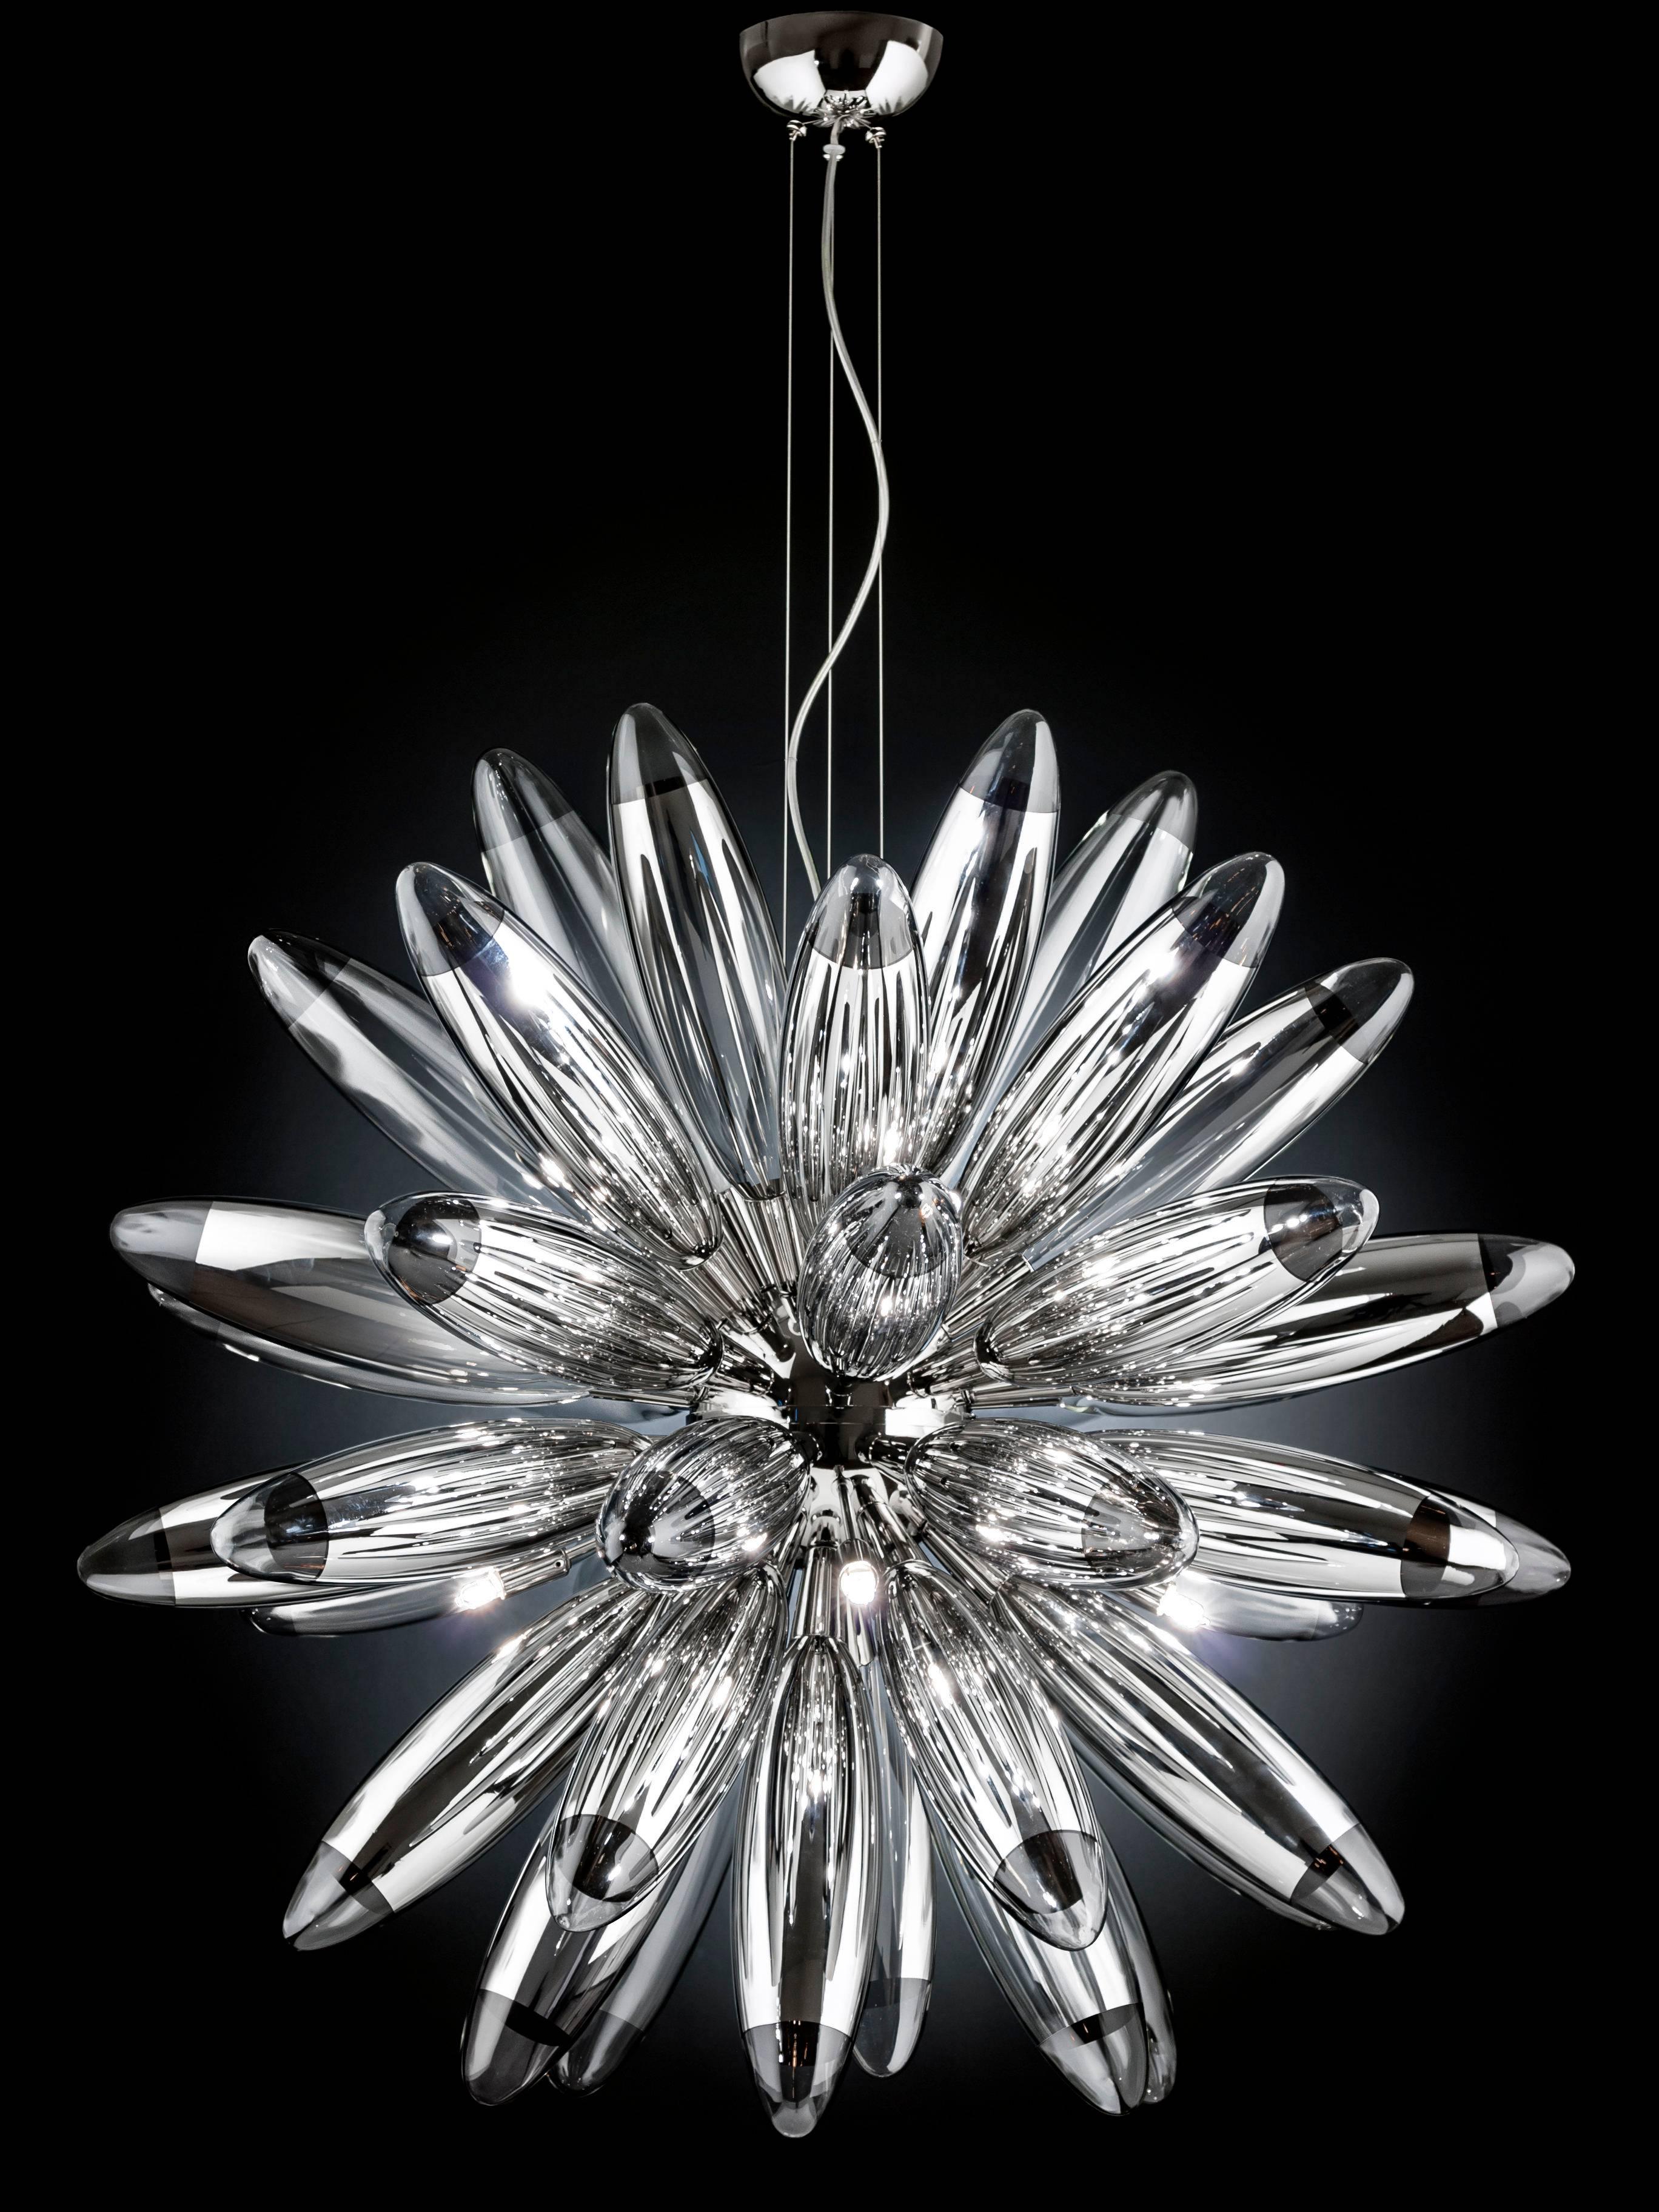 Italian torpedo sputnik chandelier with 48 mirrored blown glasses,  chrome finish metal frame / Designed by Fabio Bergomi for Fabio Ltd / Made in Italy
10 lights / G9 type / max 40W each
Height: 33.5 inches plus cables and canopy / Diameter: 33.5